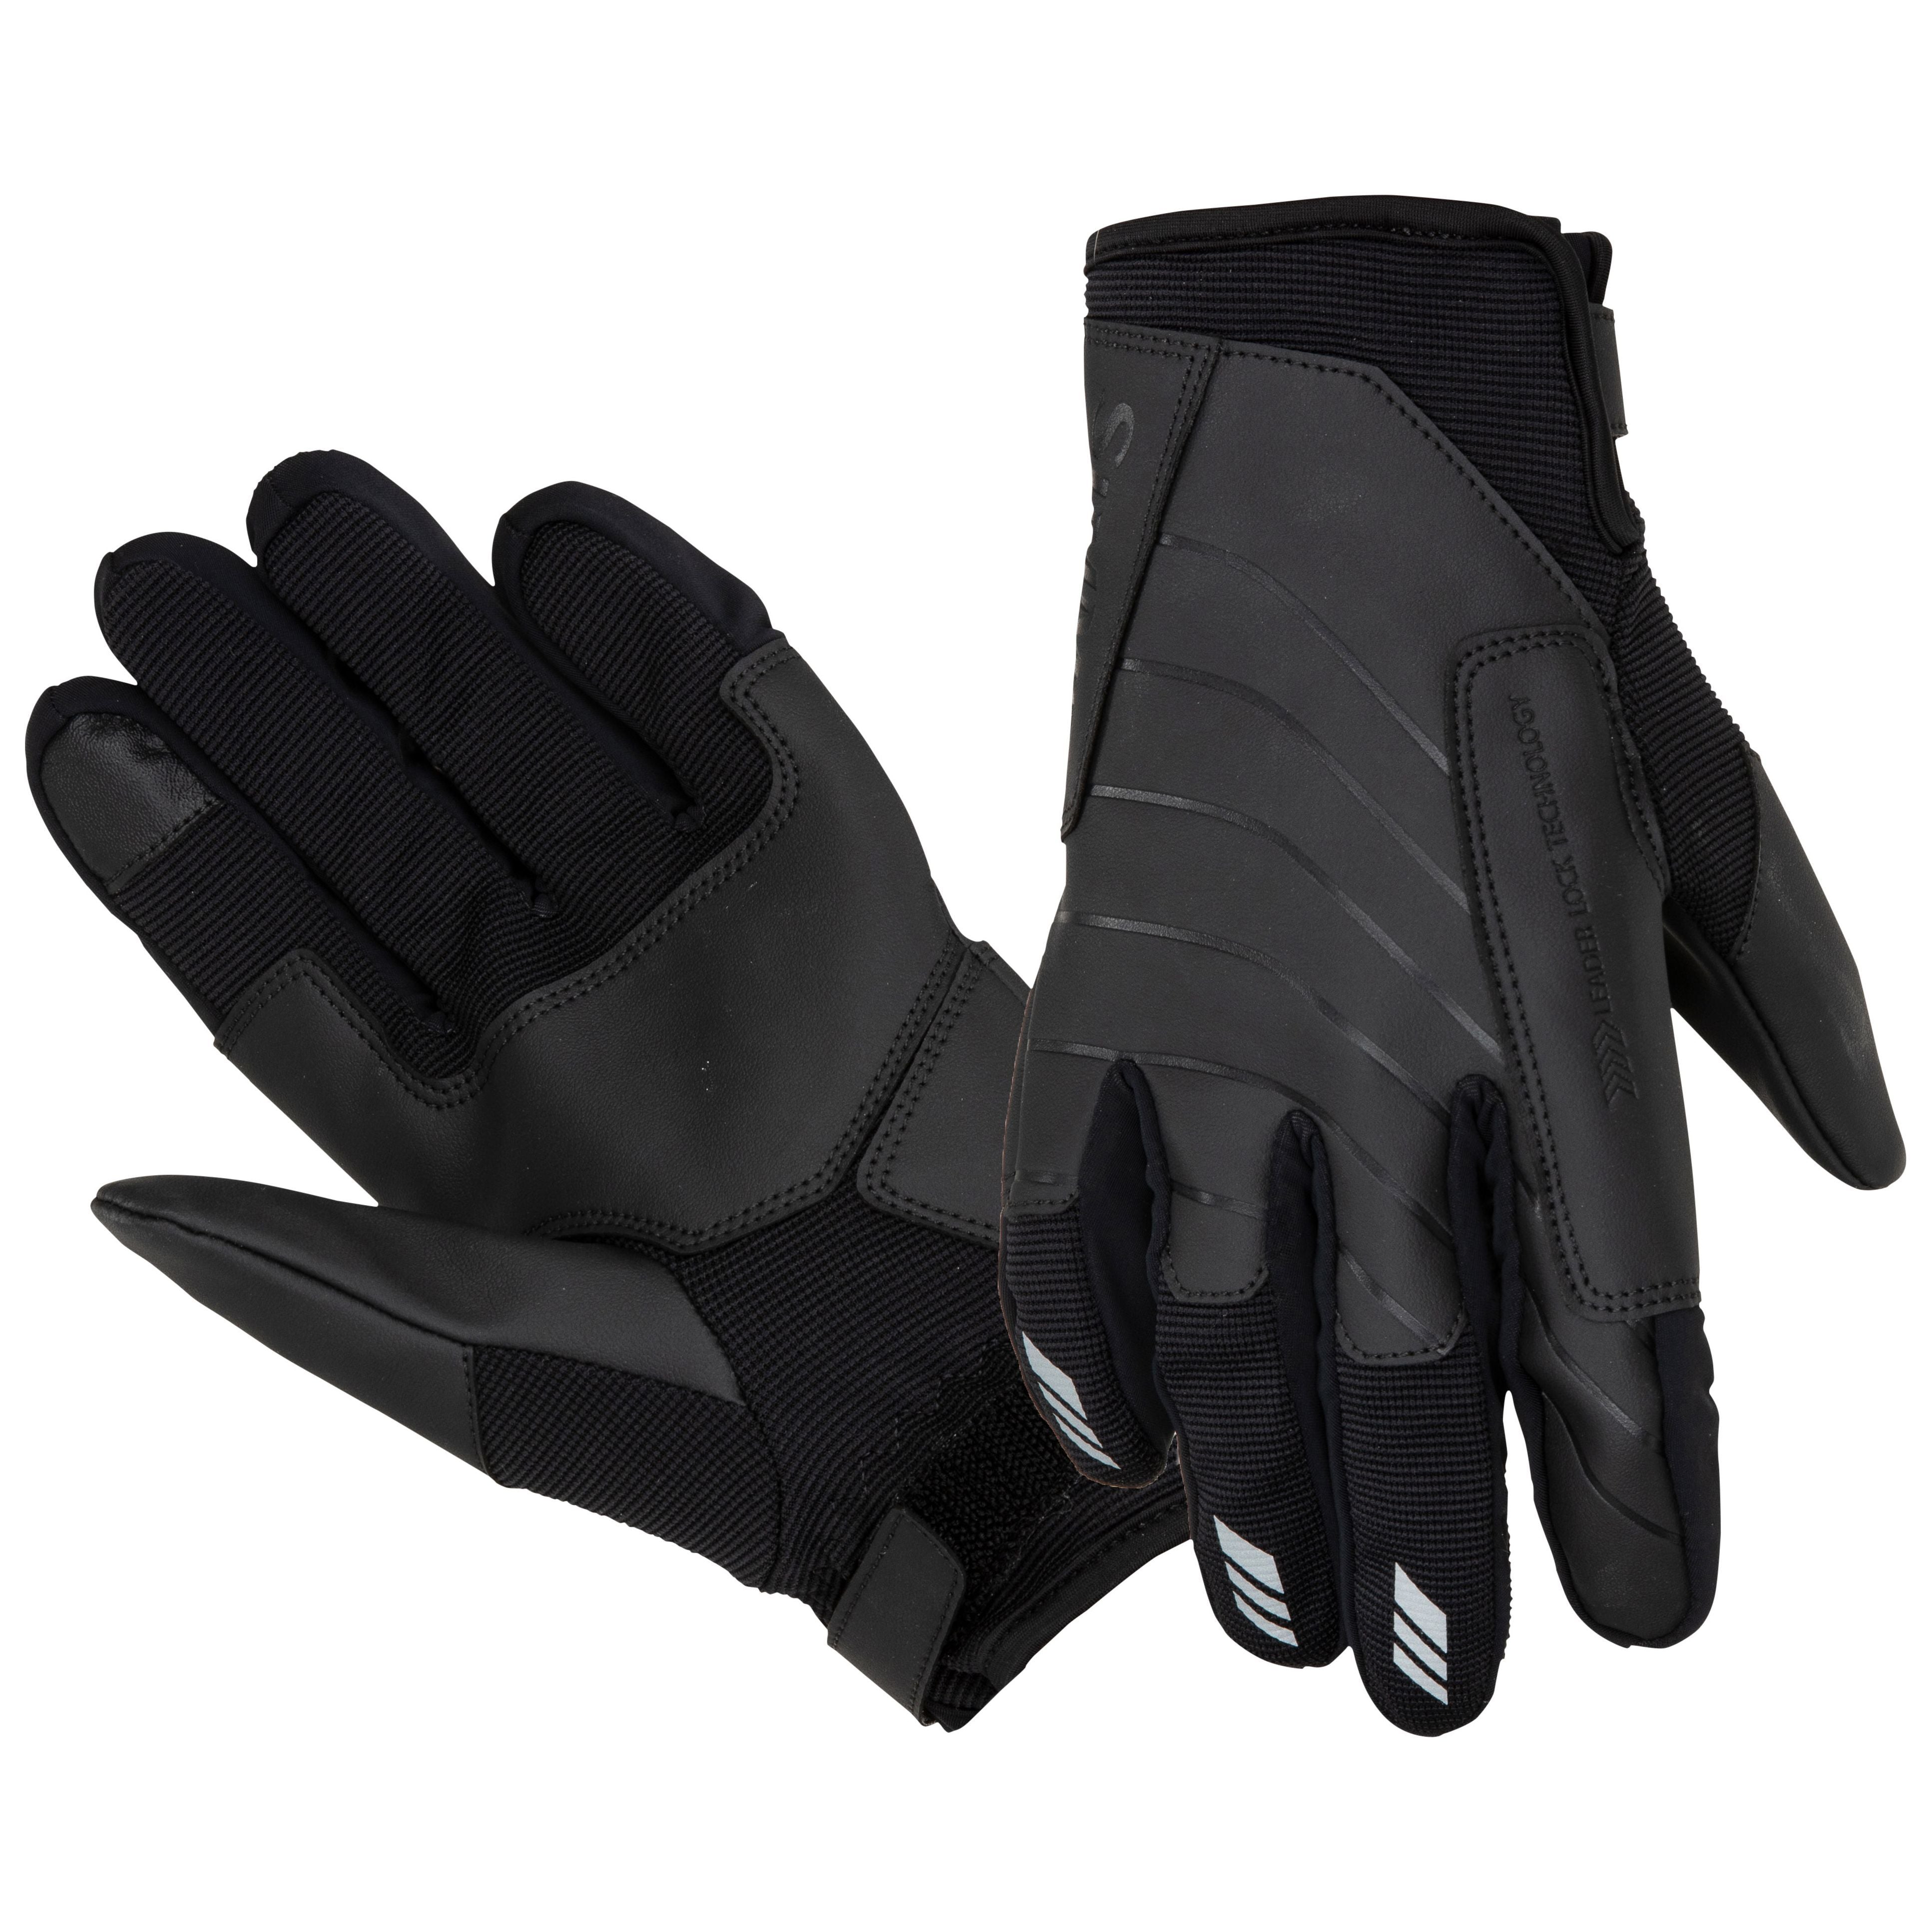 Simms Offshore Angler's Glove Black Image 01